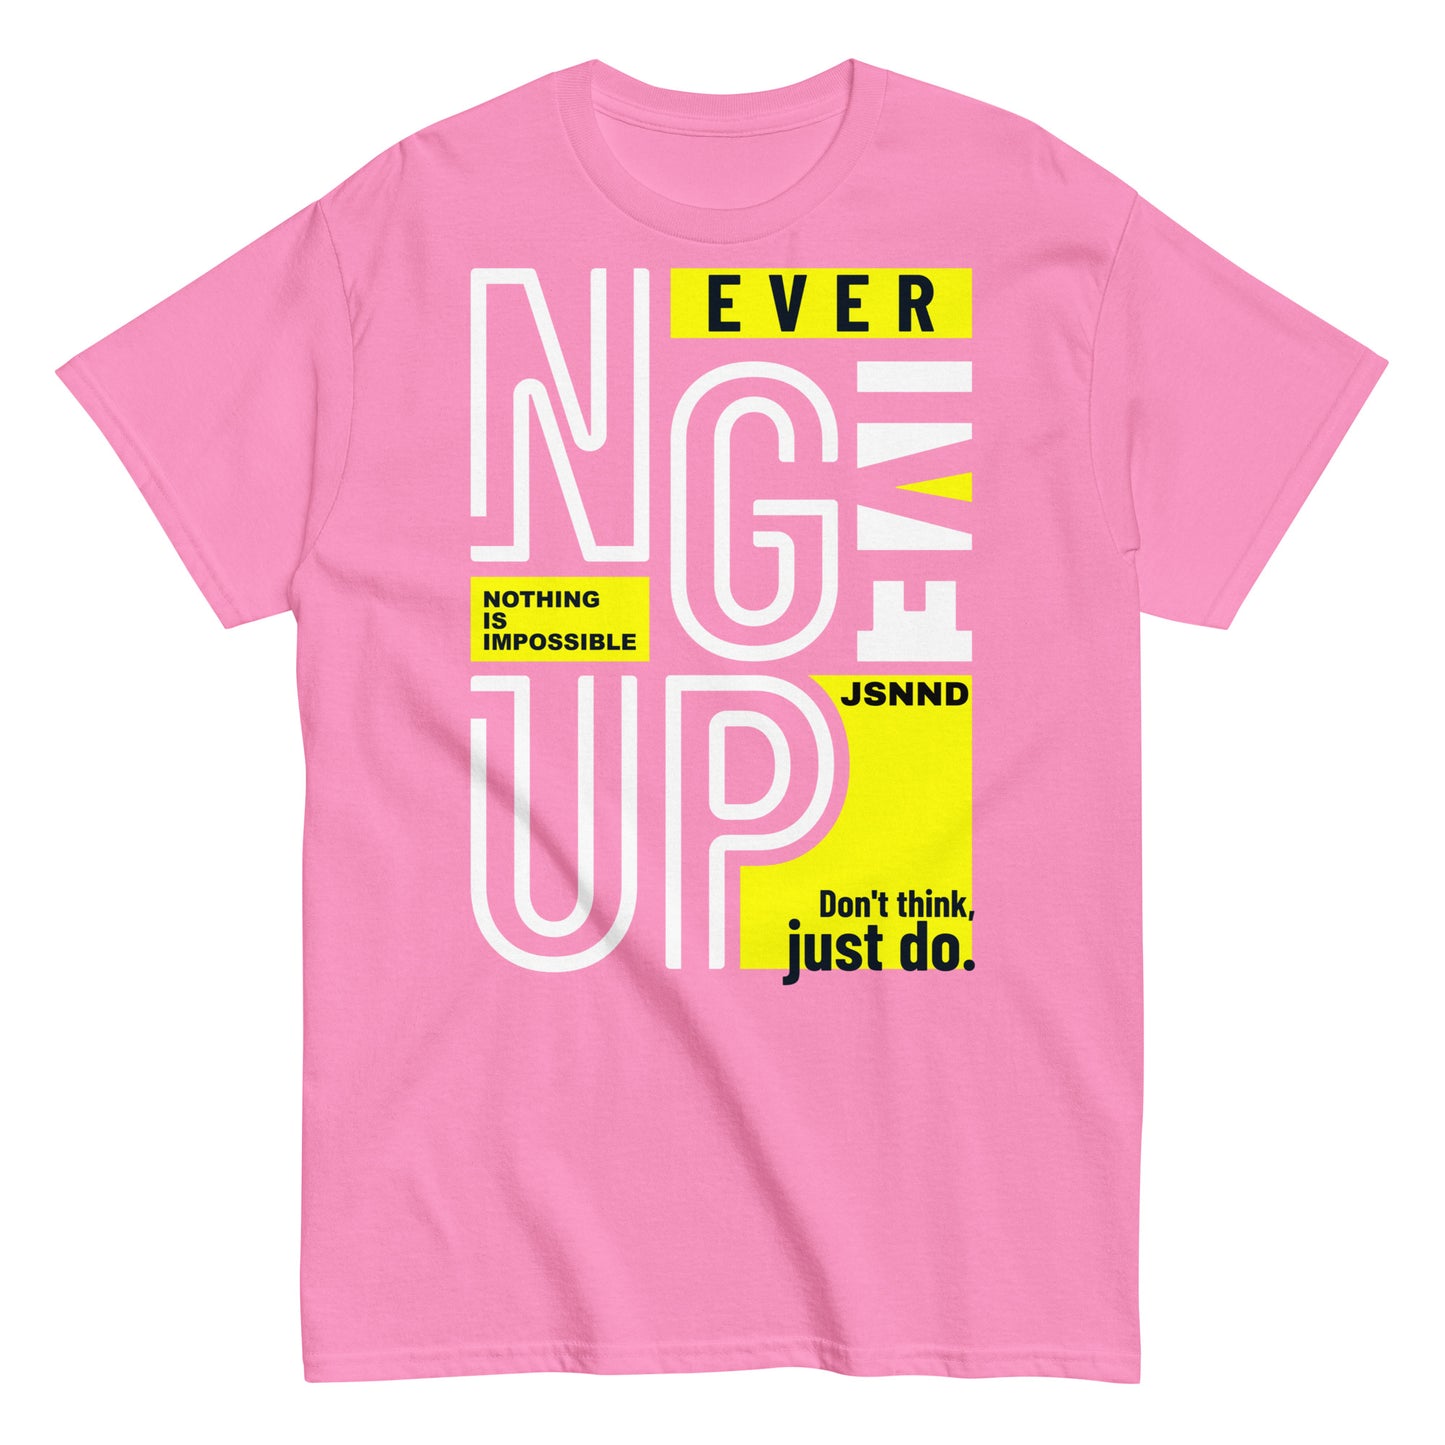 Never-give-up T-shirt